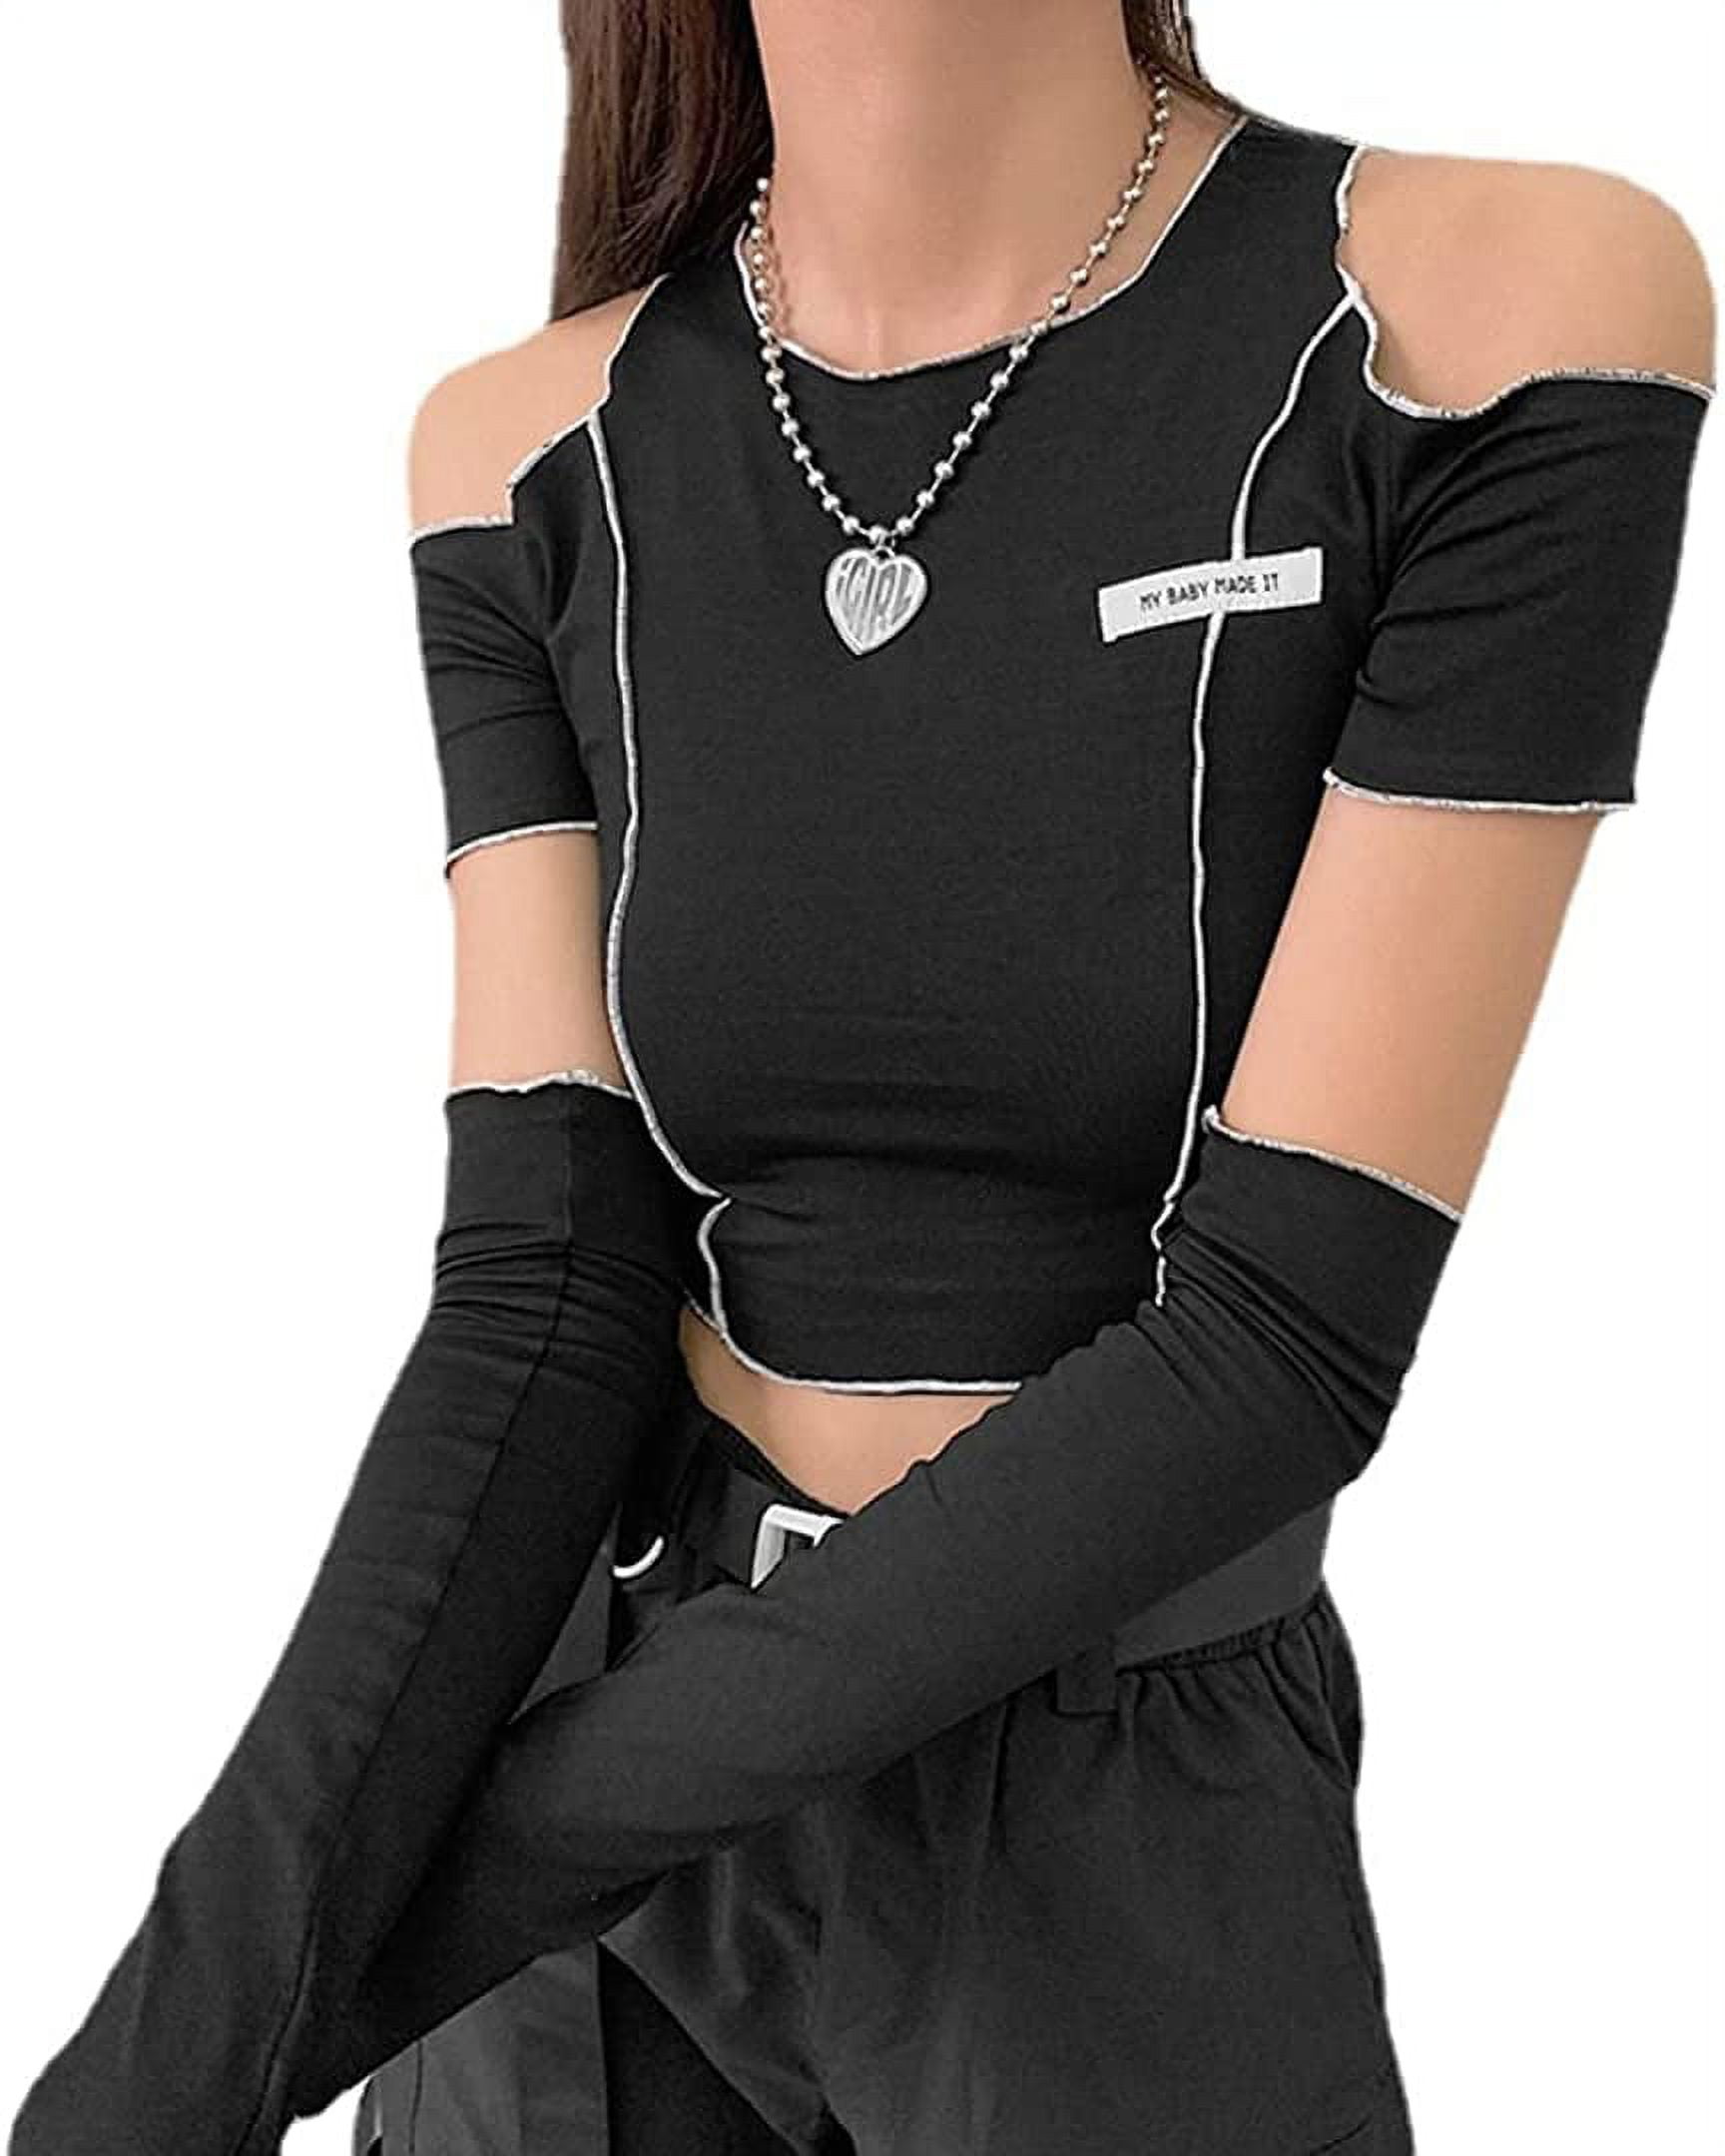 cyber y2k Outfit